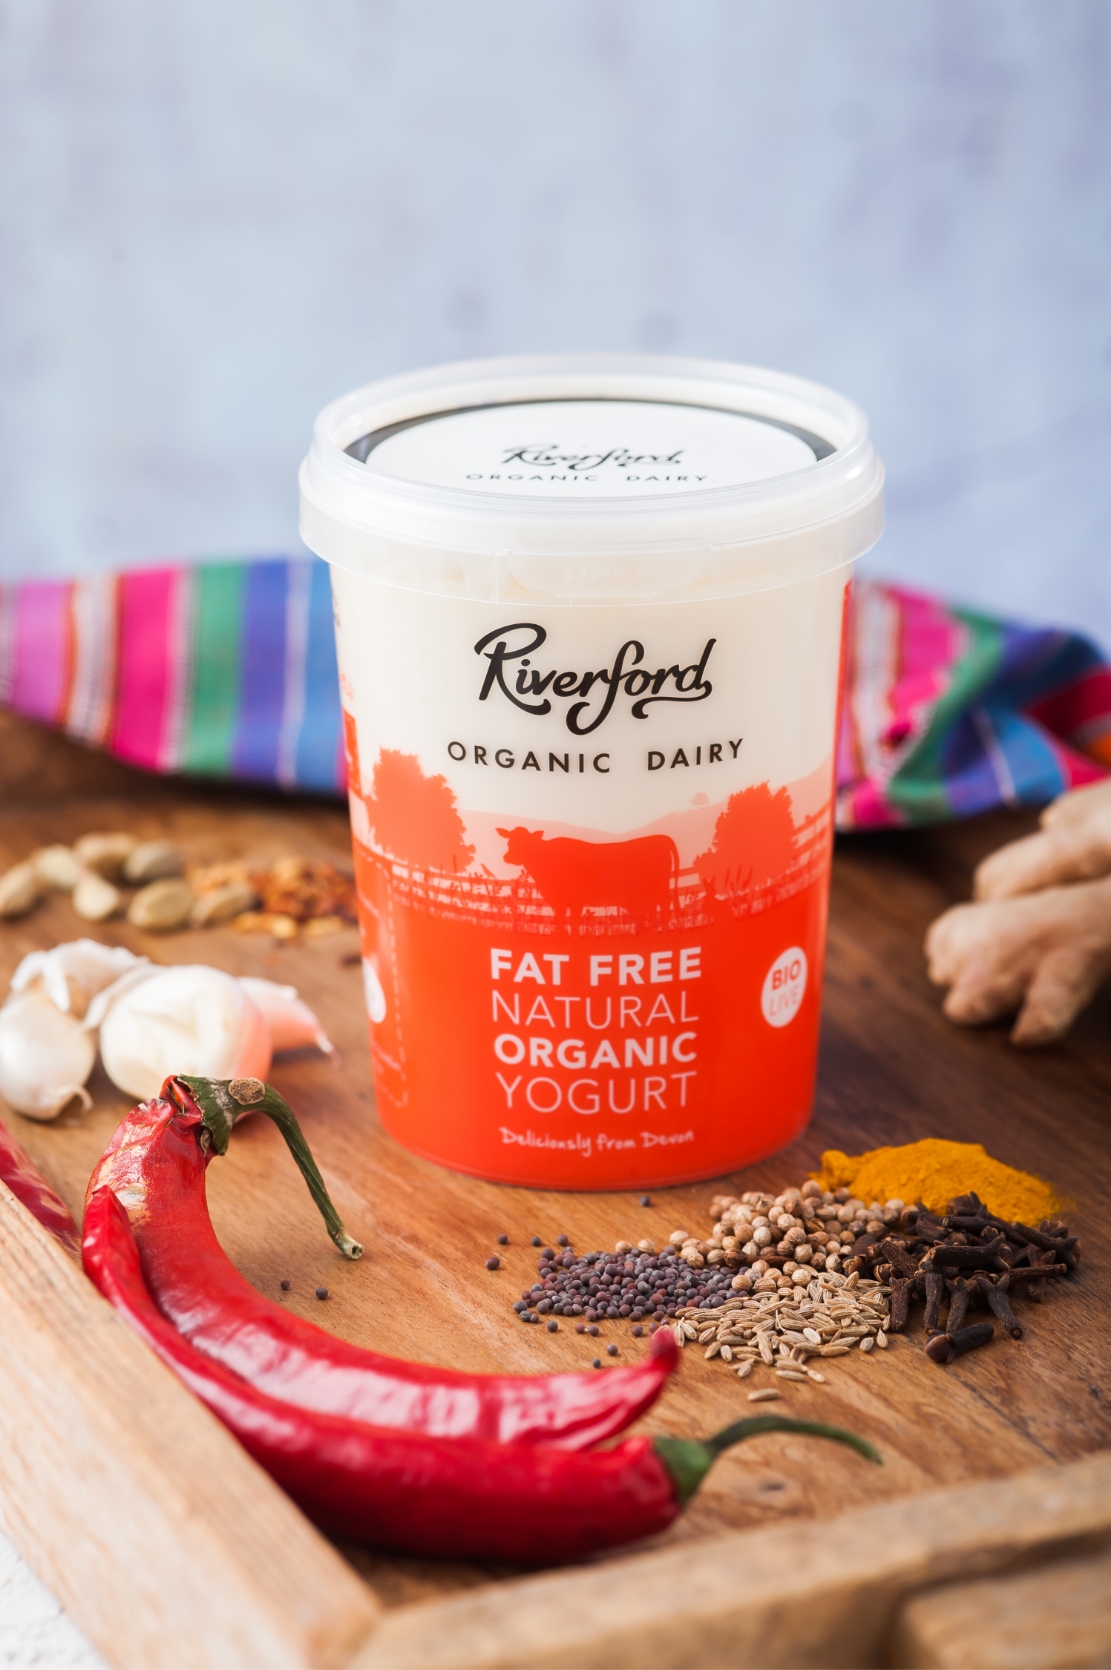 Riverford Dairy Fat Free Natural Yoghurt packaging